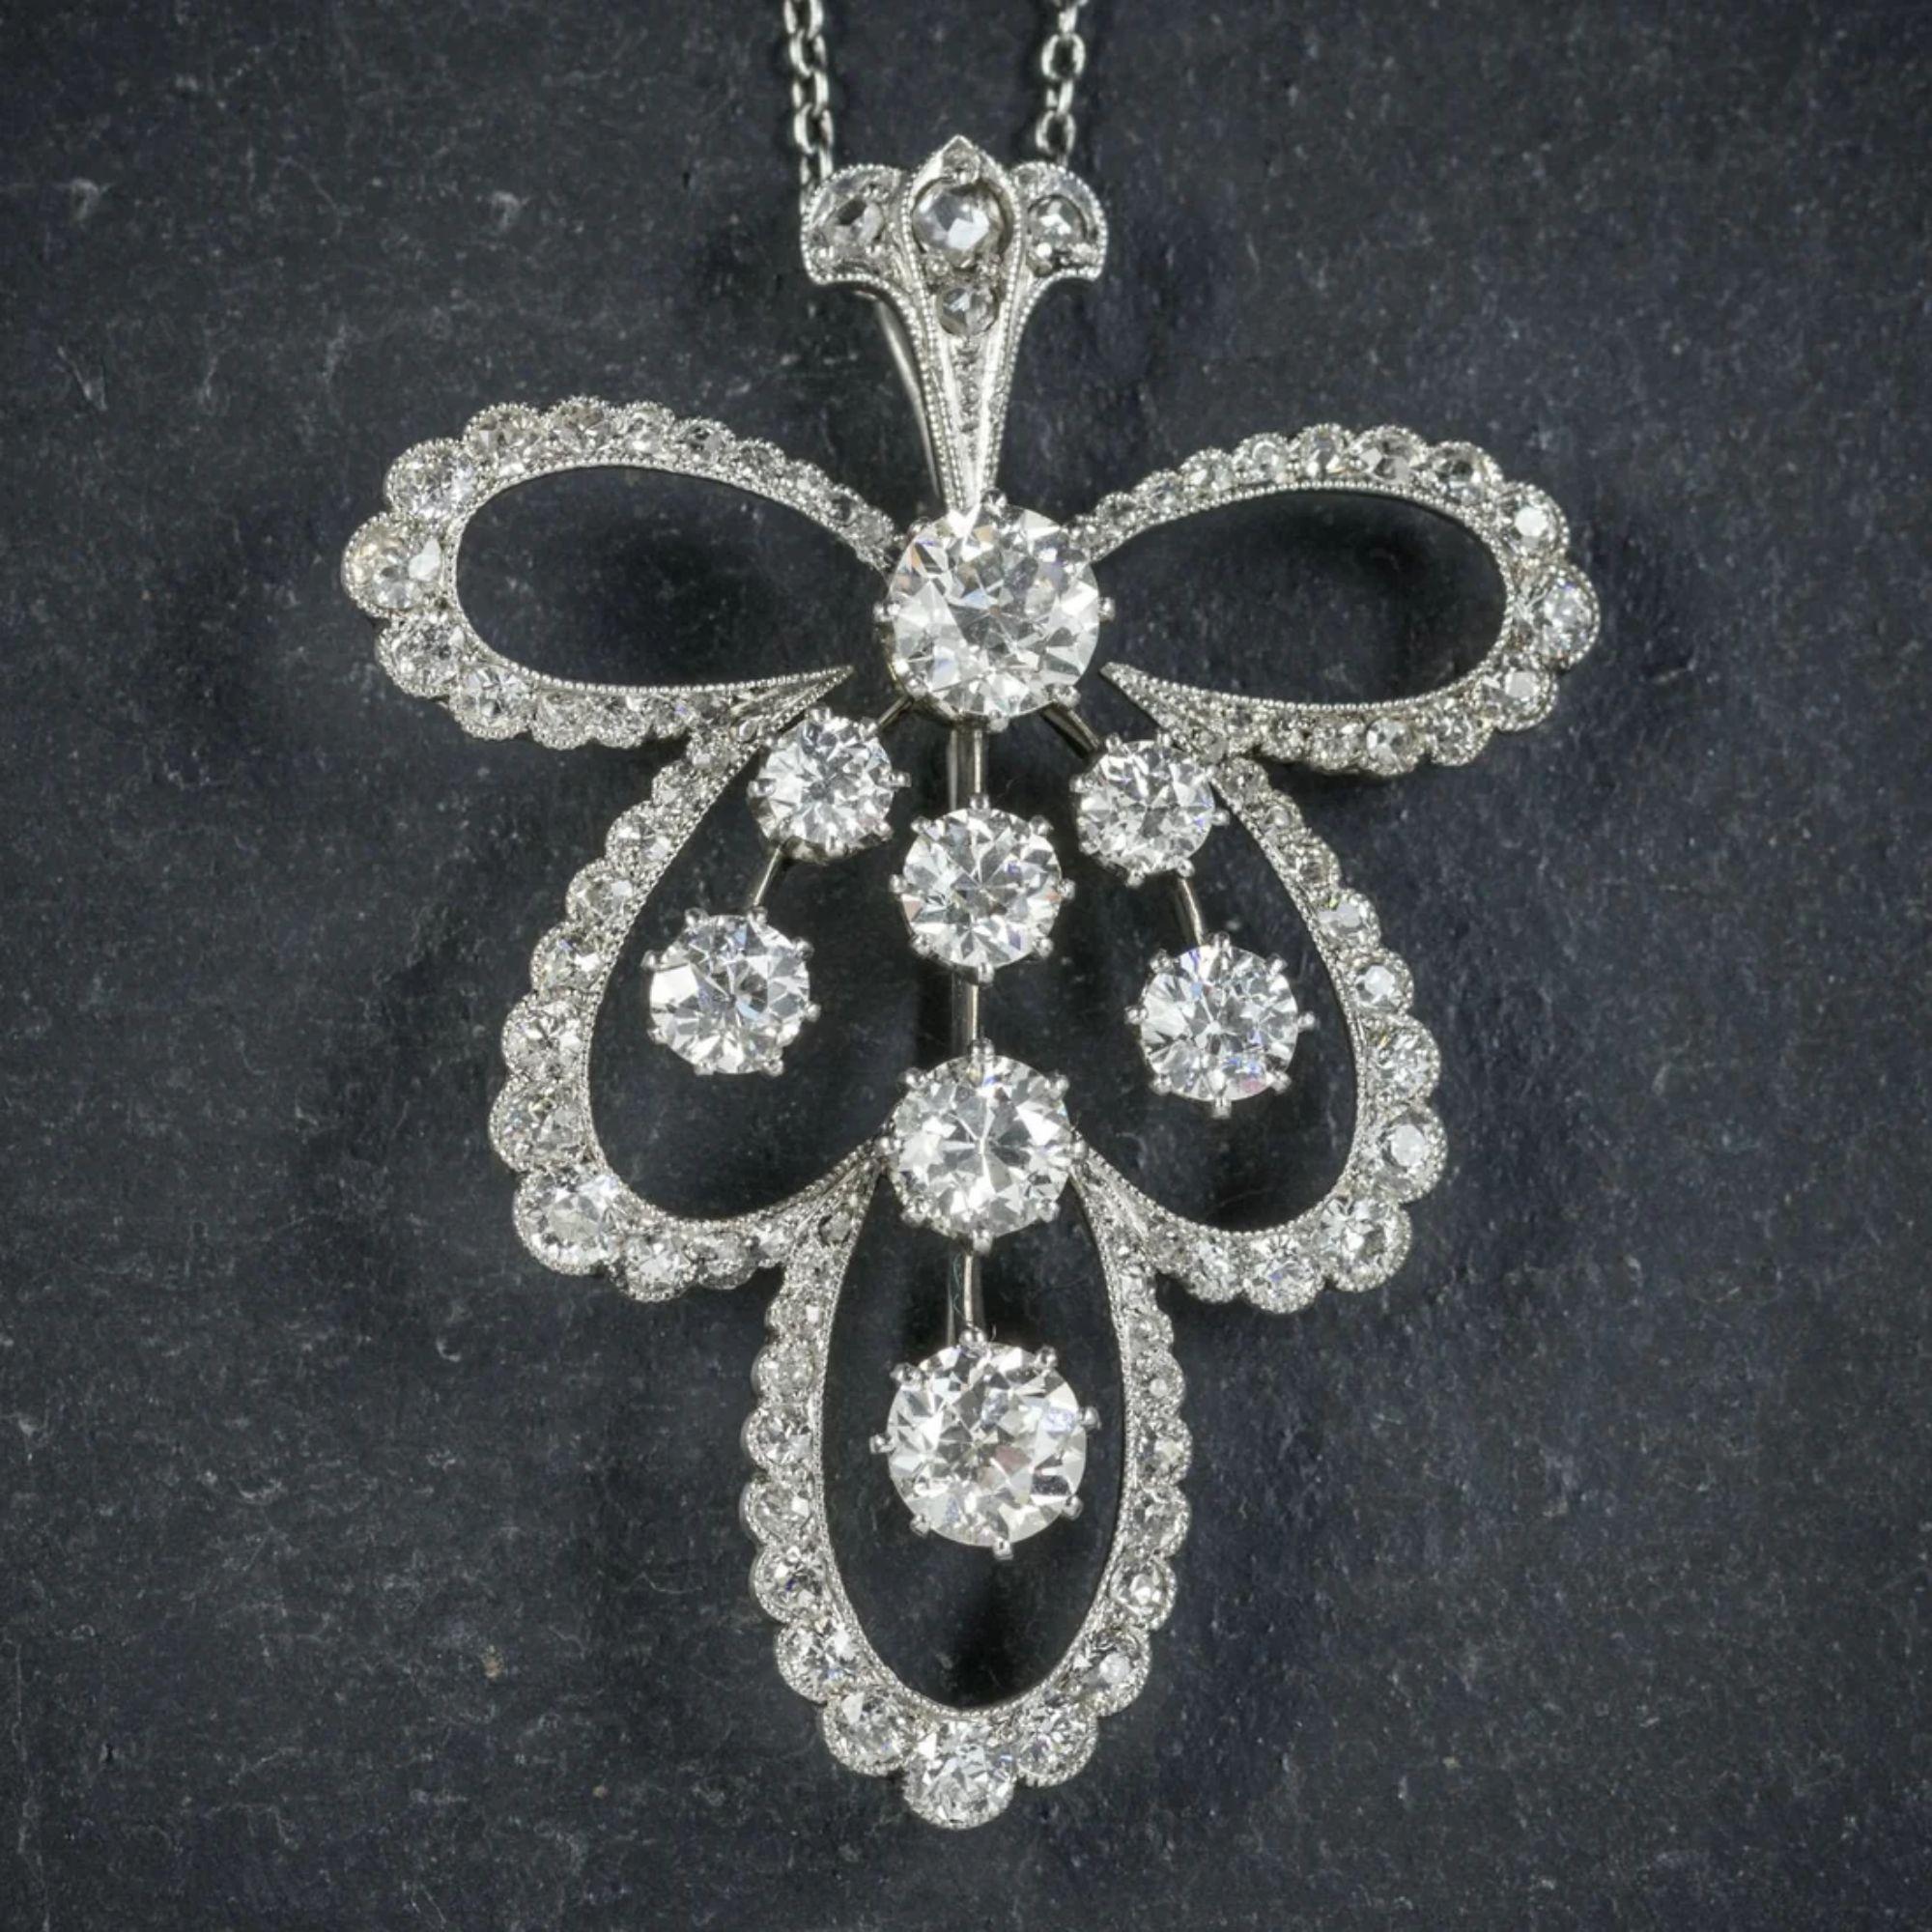 Old European Cut Antique Edwardian Diamond Pendant Necklace Platinum Brooch in 4cts of Diamond For Sale